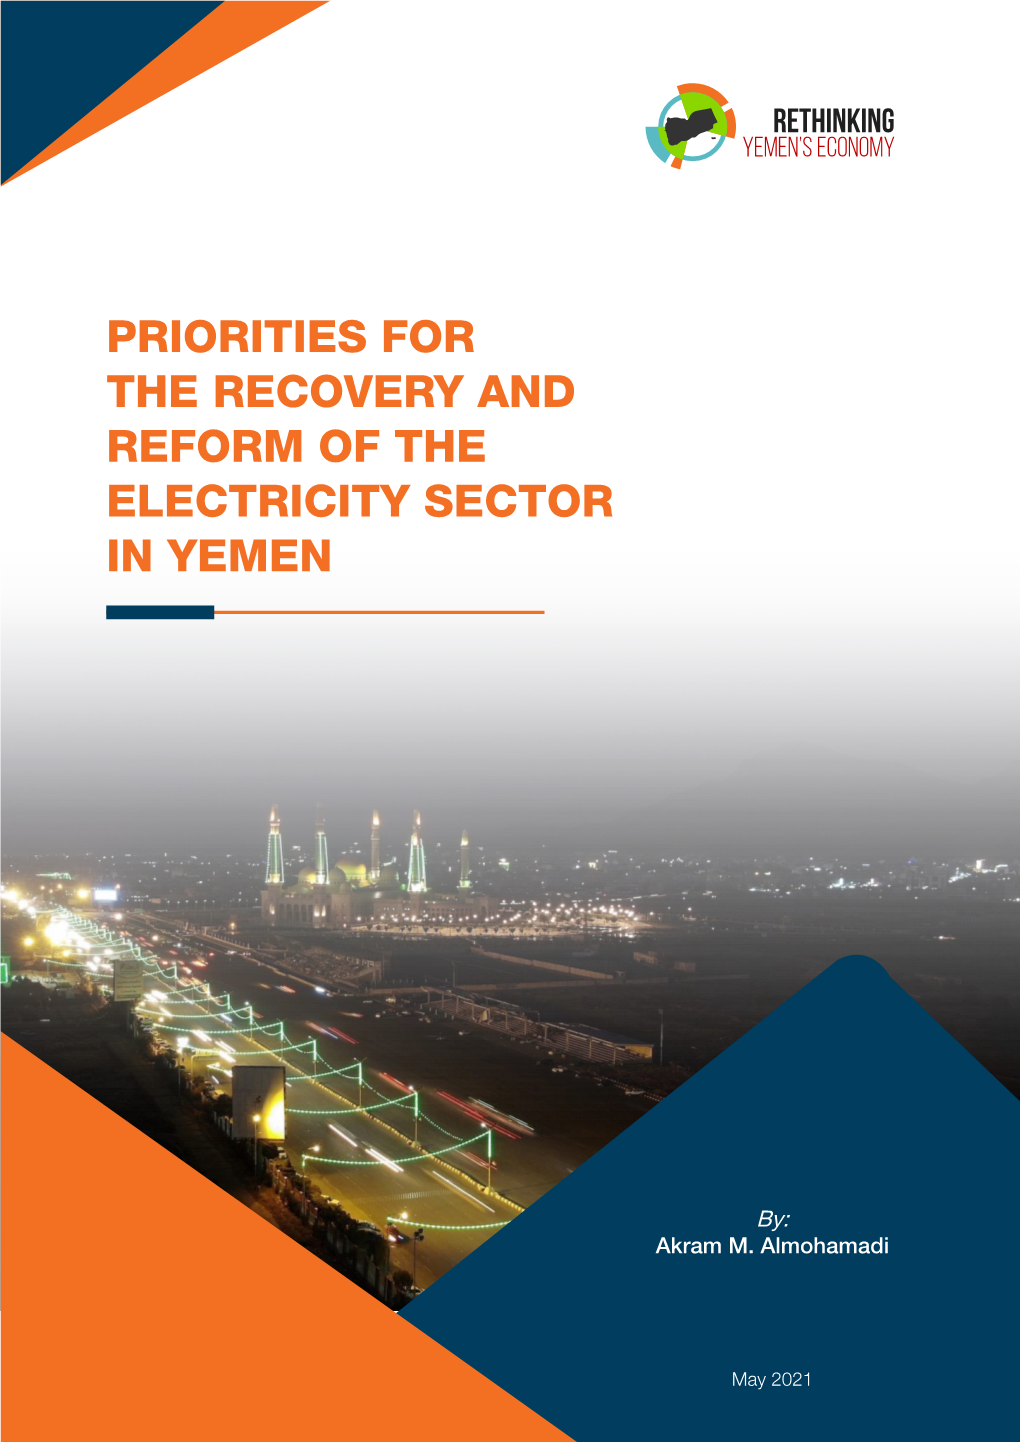 Priorities for the Recovery and Reform of the Electricity Sector in Yemen